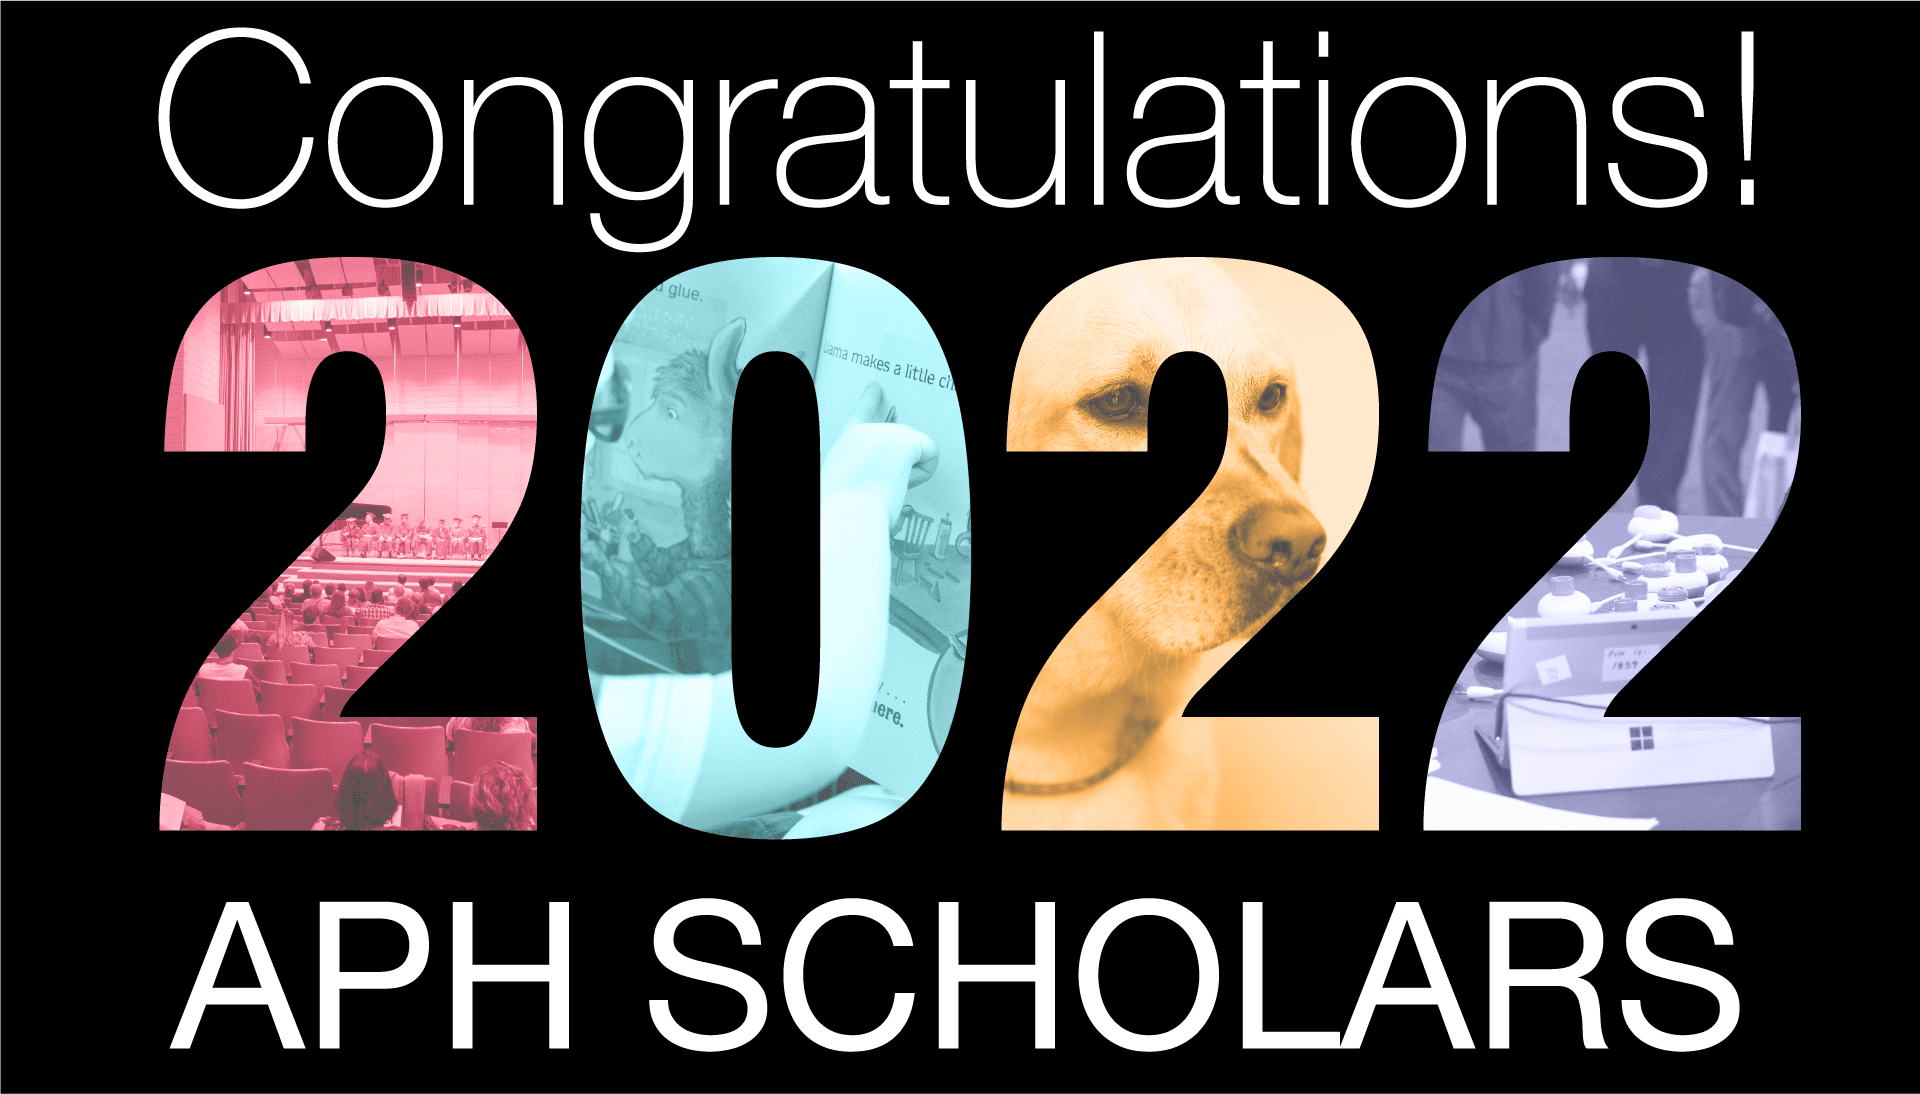 Text reads "Congratulations 2022 APH Scholars" and the numbers of 2022 are made of branded colored images from the field including products and a guide dog.